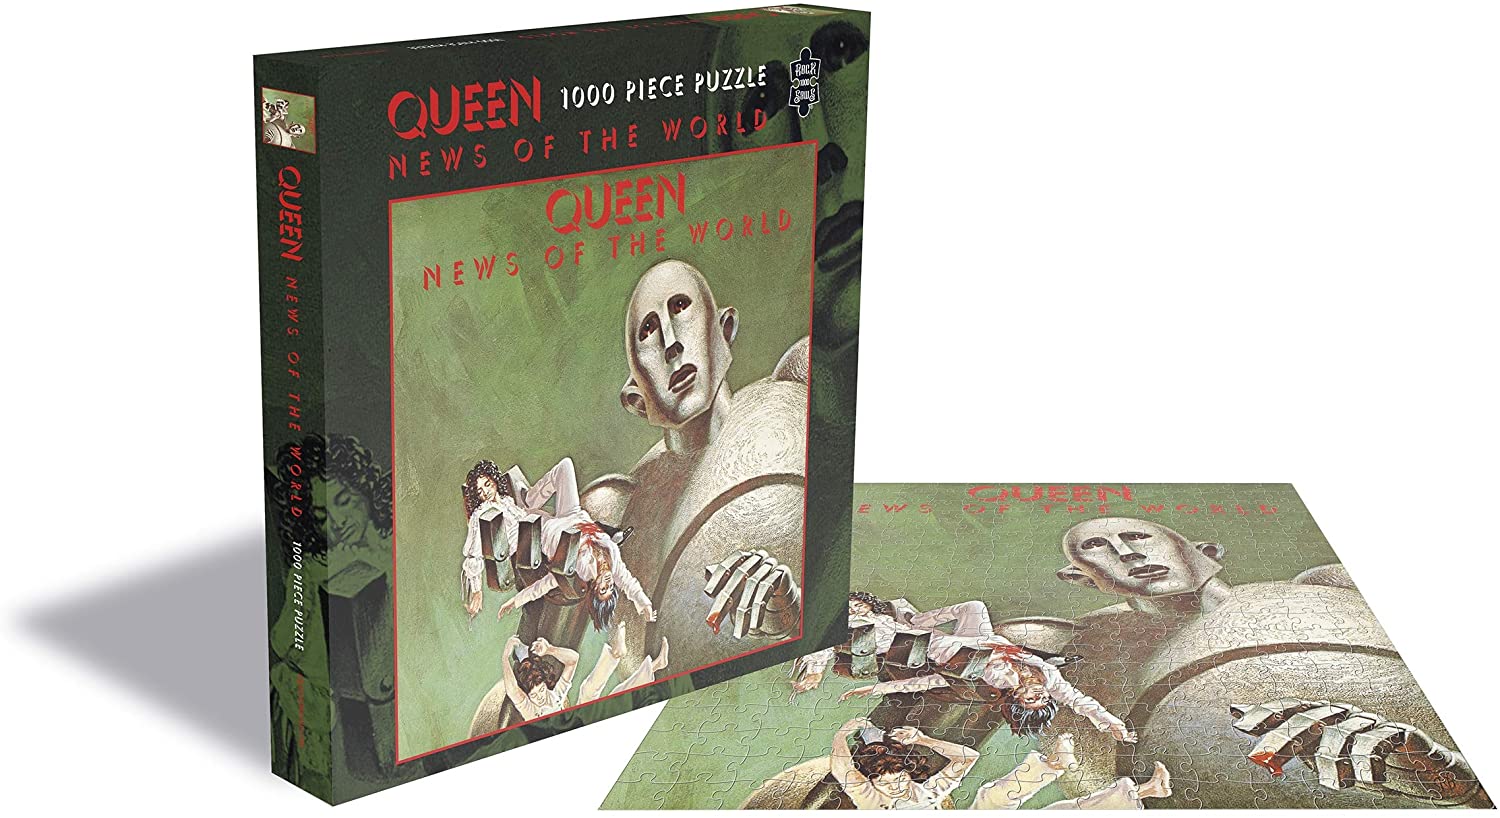 Rock Saws Queen - News of the World 1000 Teile Puzzle Zee-Puzzle-26212 von Rock Saws